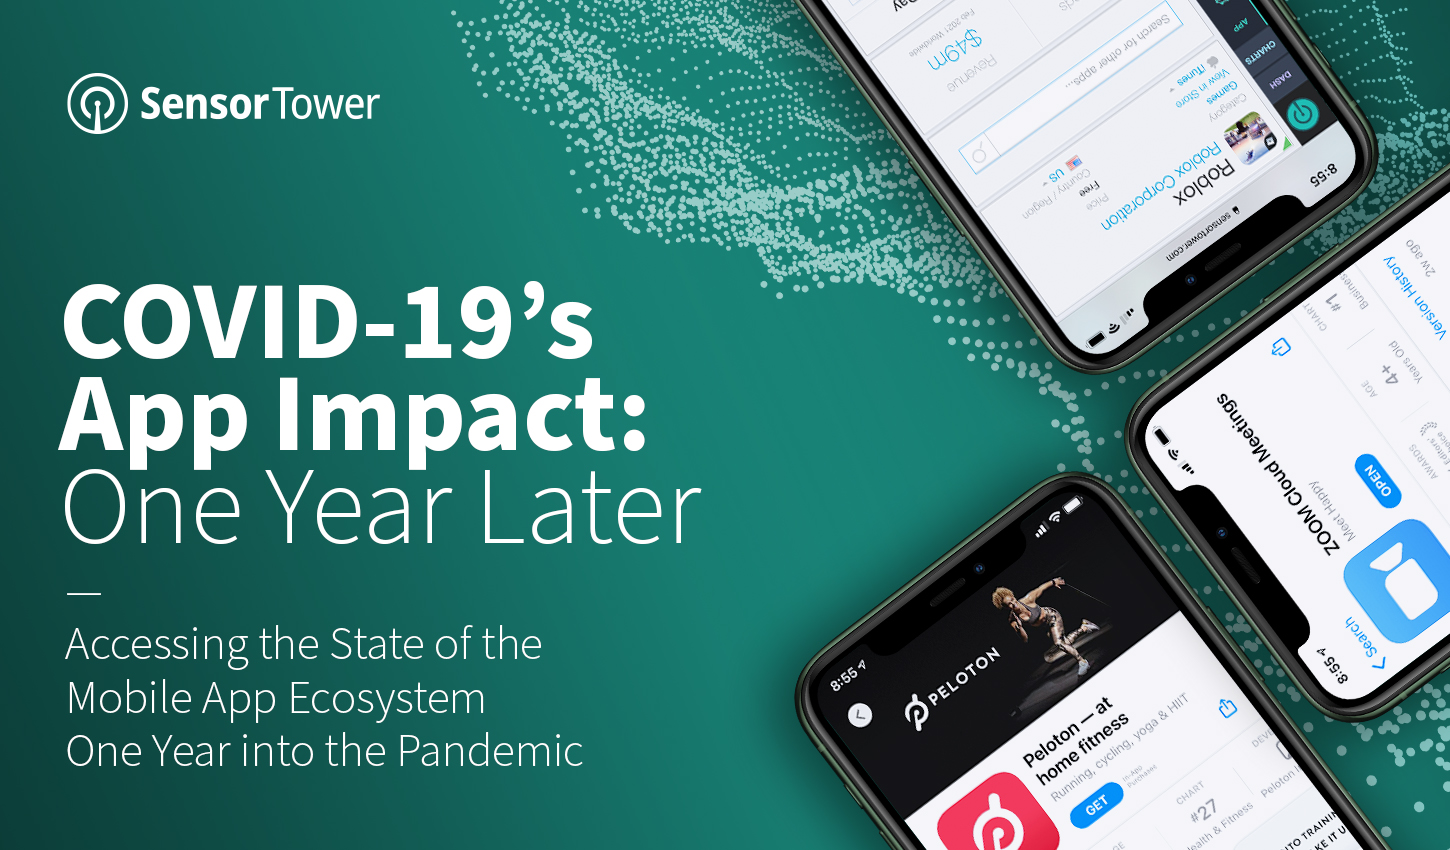 Sensor Tower's newest report on COVID-19's impact a year later reveals category trends and tracks the progress of industries such as sports and mobile games.